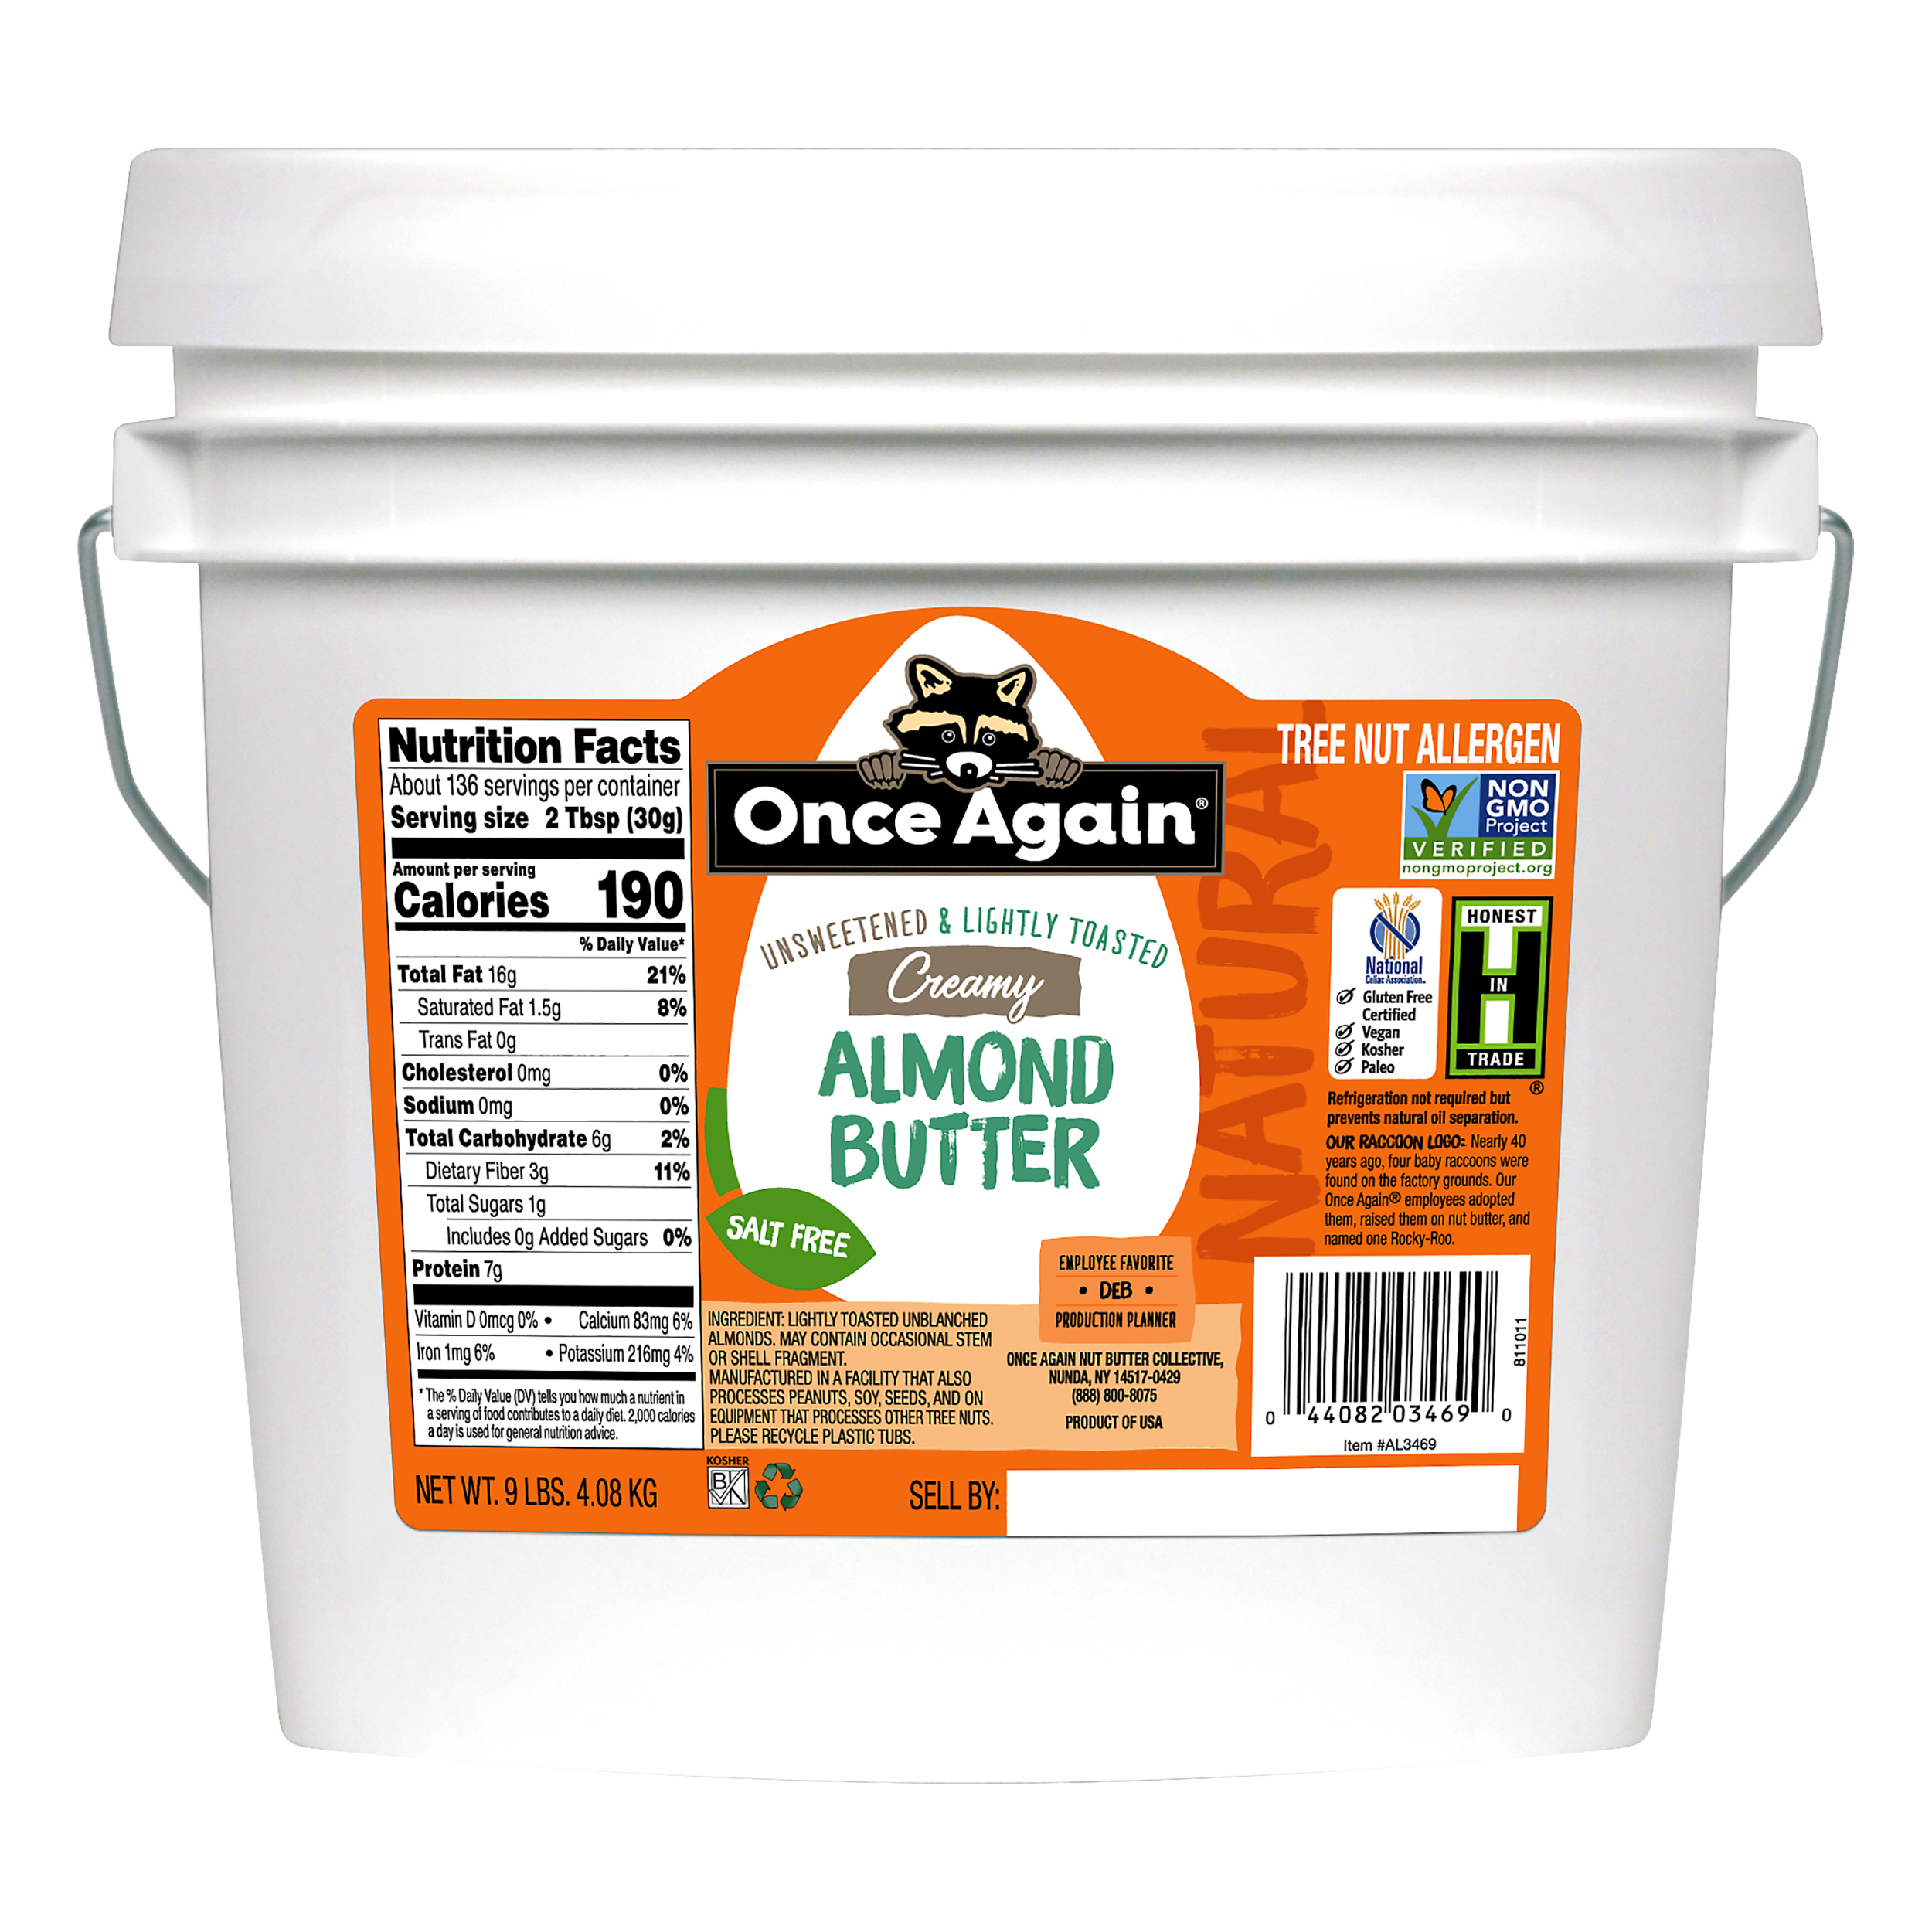 Once Again Unsweetened & Lightly Toasted Creamy Natural Almond Butter 9 Lb